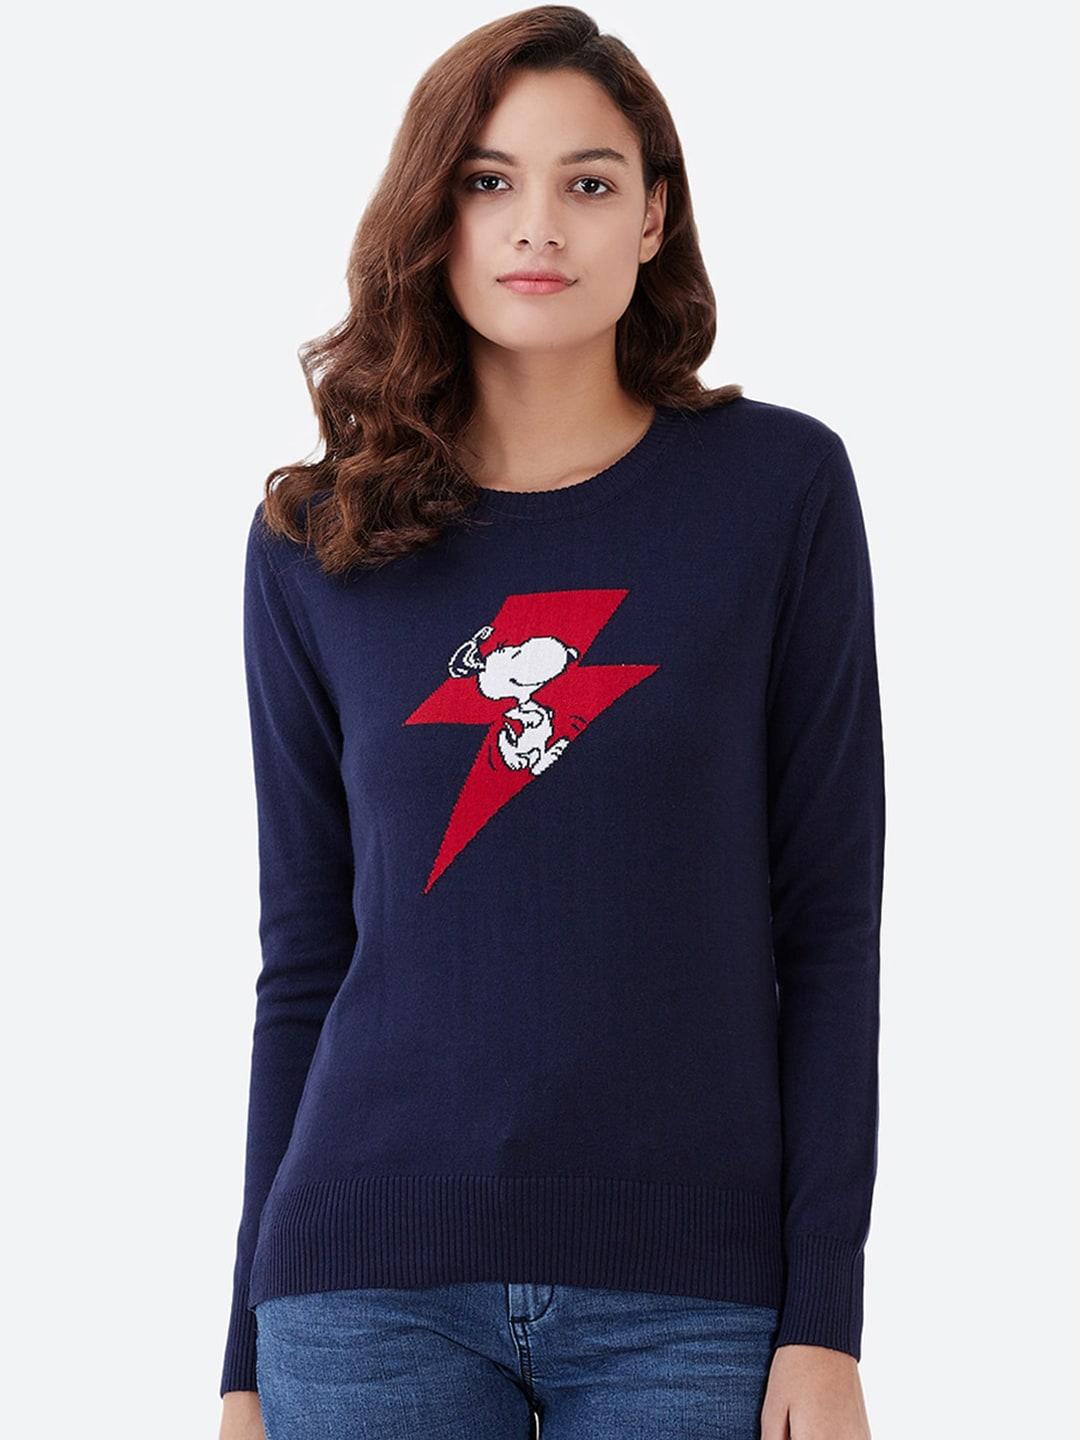 free-authority-peanuts-featured-women-navy-blue-printed-pullover